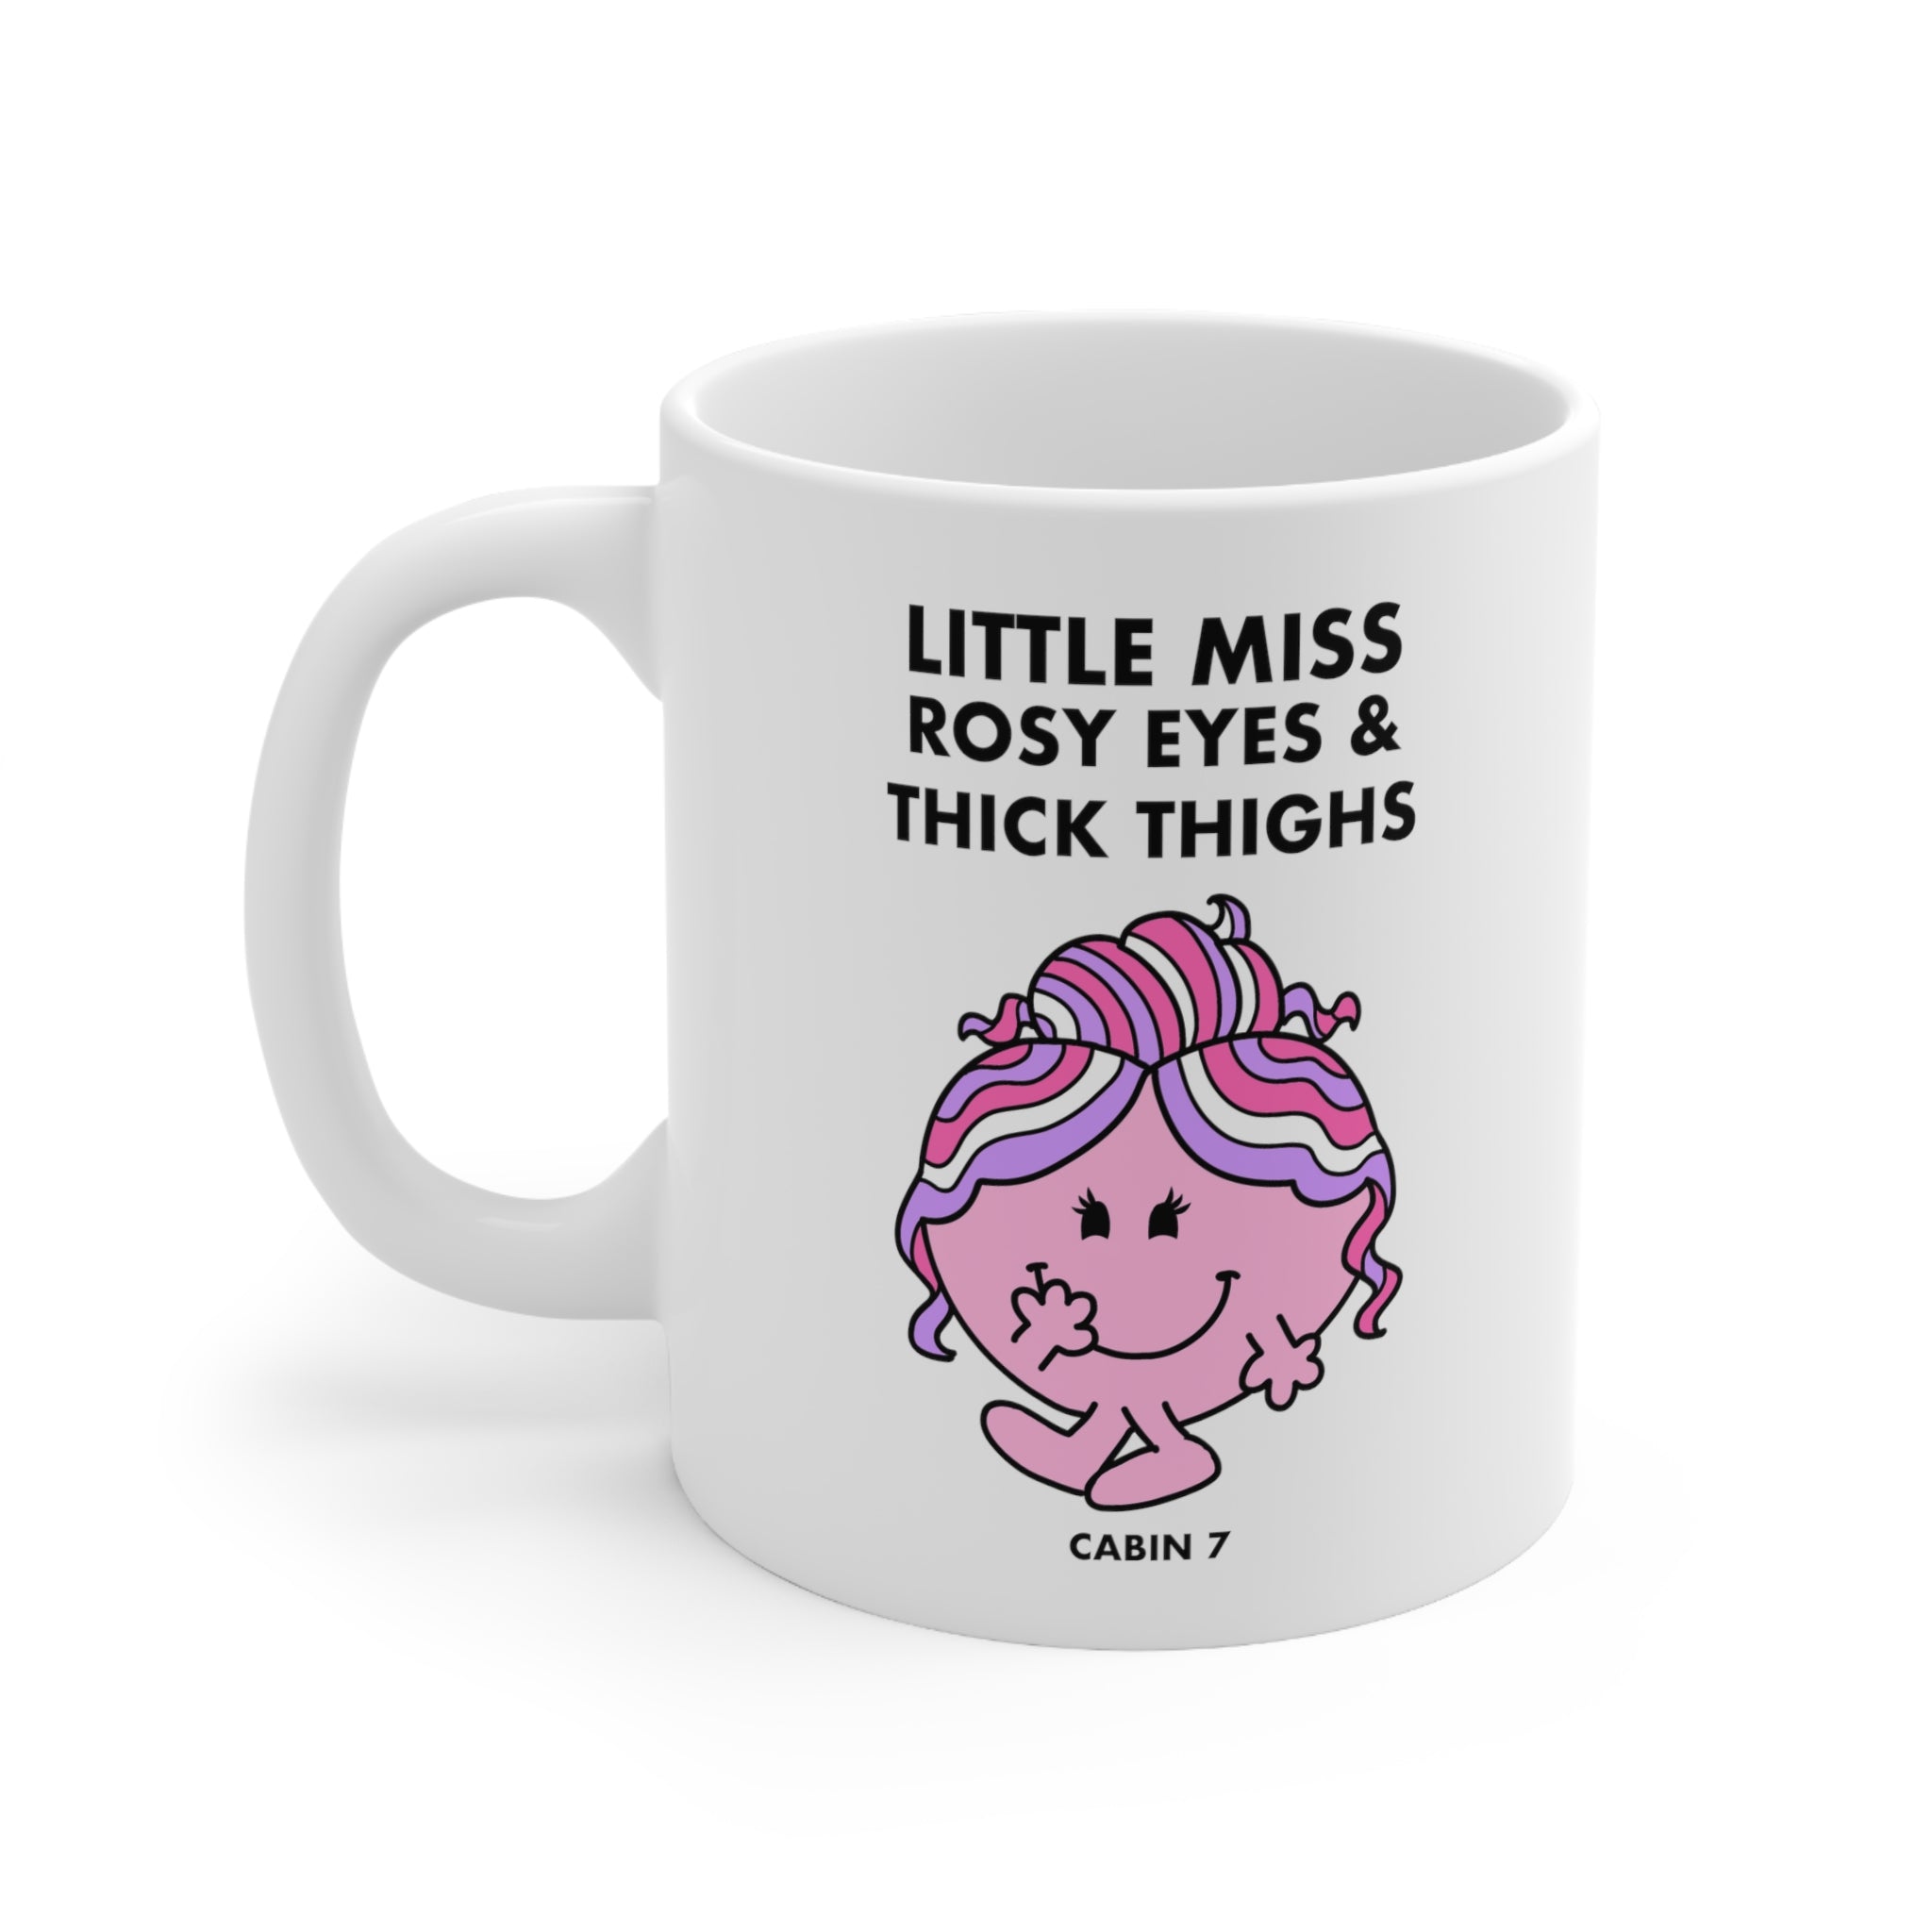 Little Miss Rosy Eyes & Thick Thighs Mug